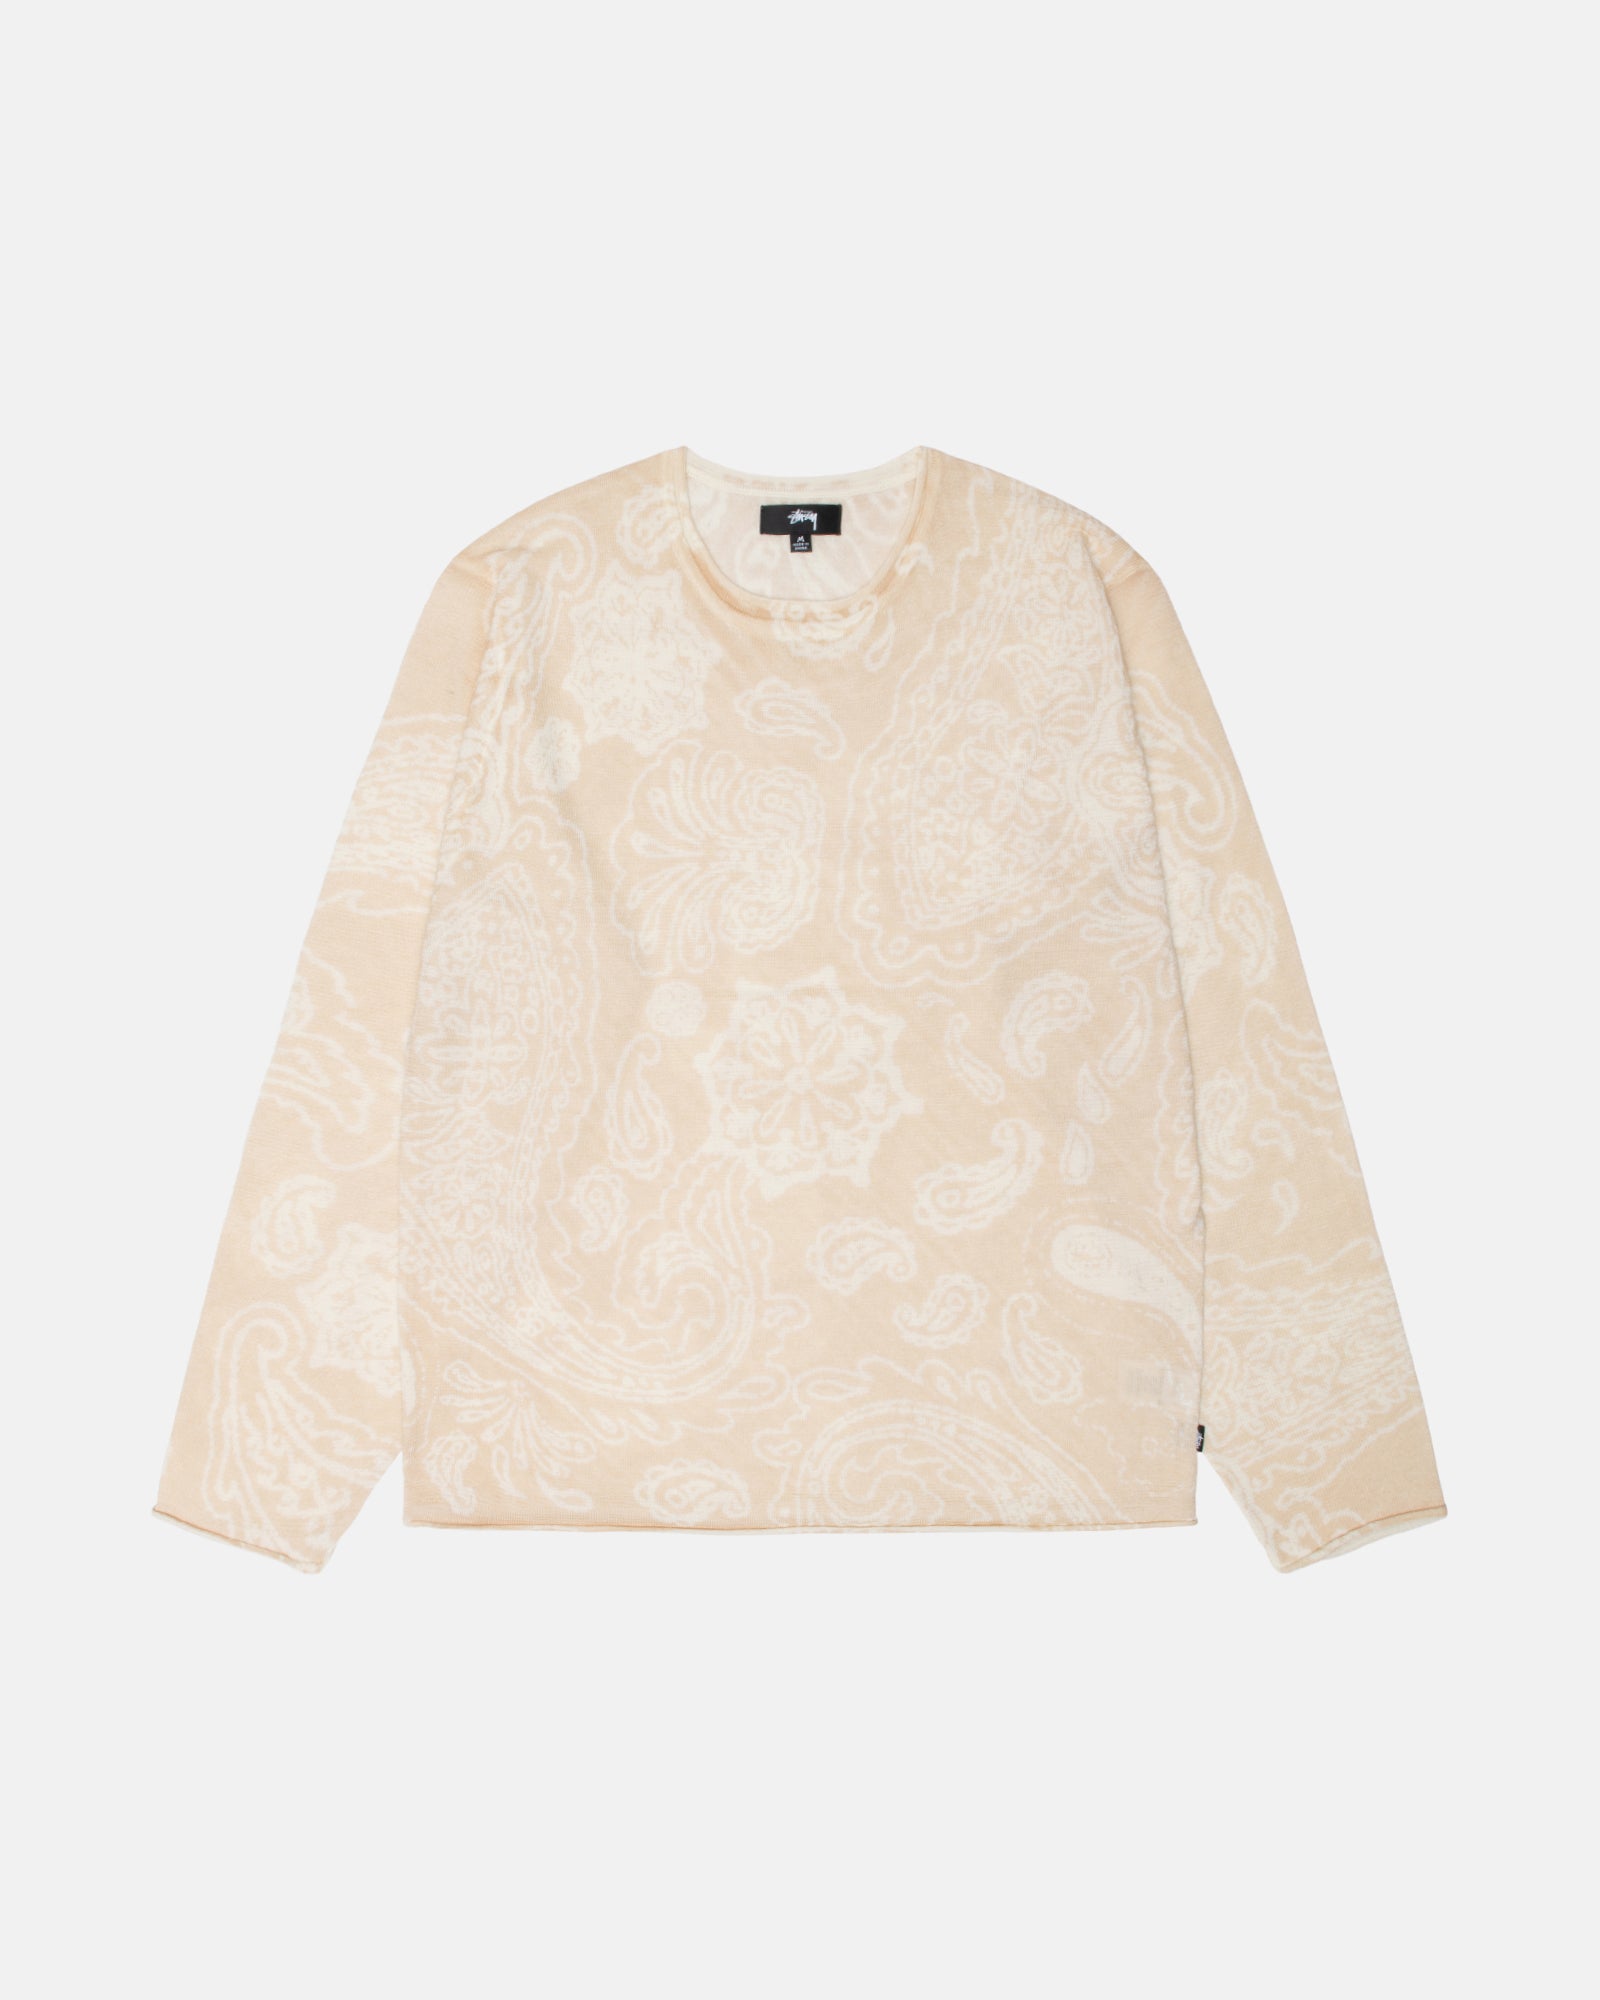 Paisley Sweater in natural – Stüssy Japan